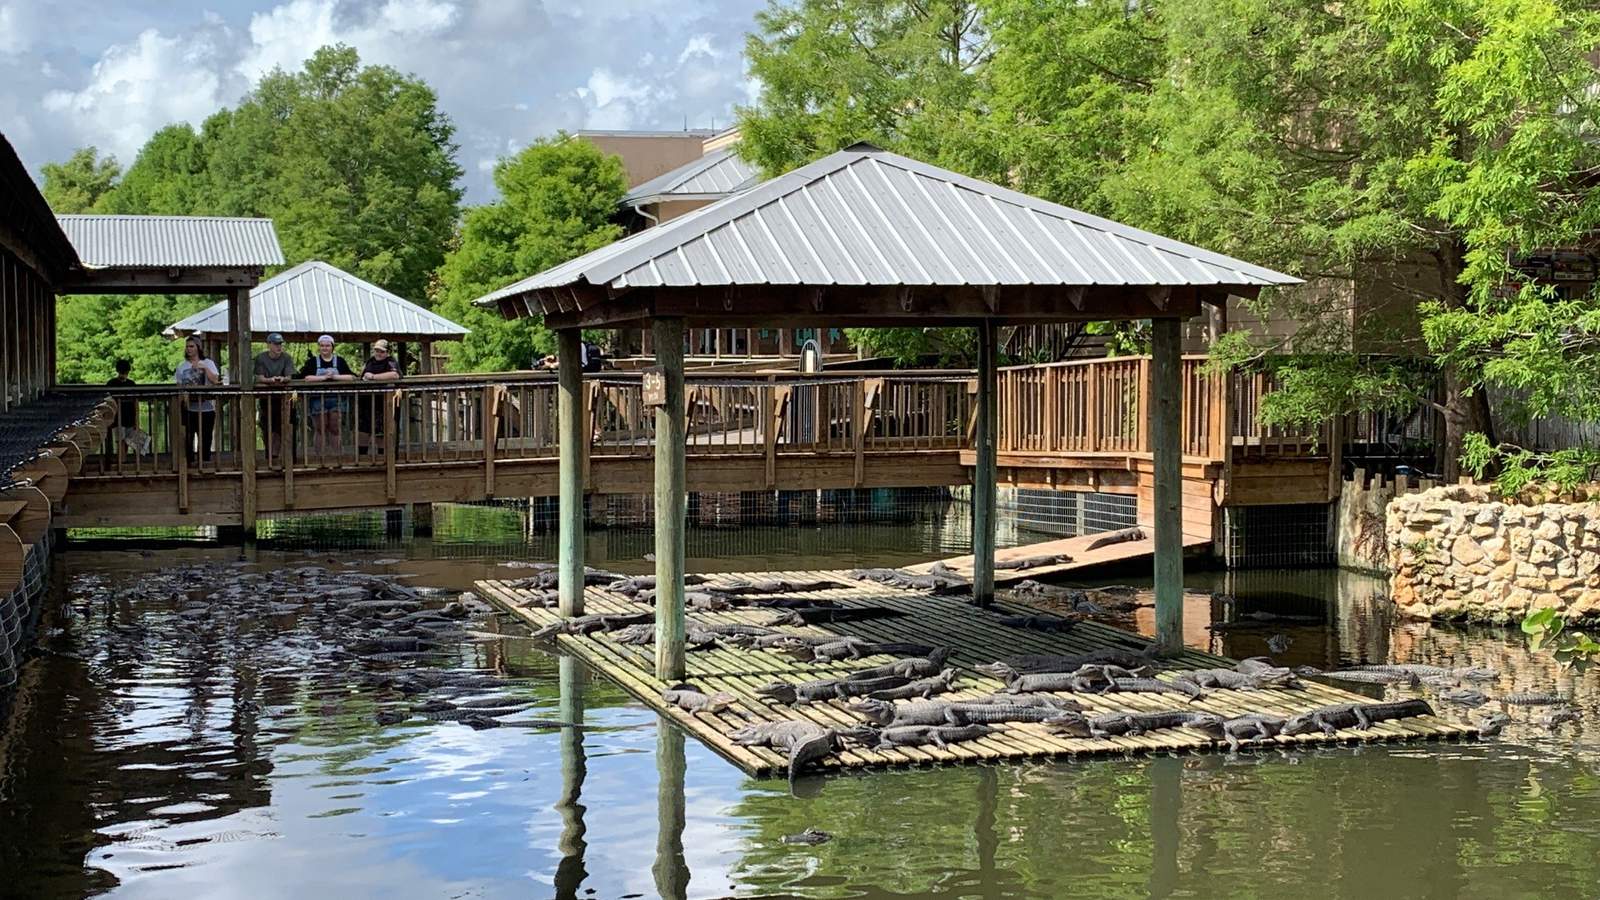 Gatorland brings back special rate for Florida residents